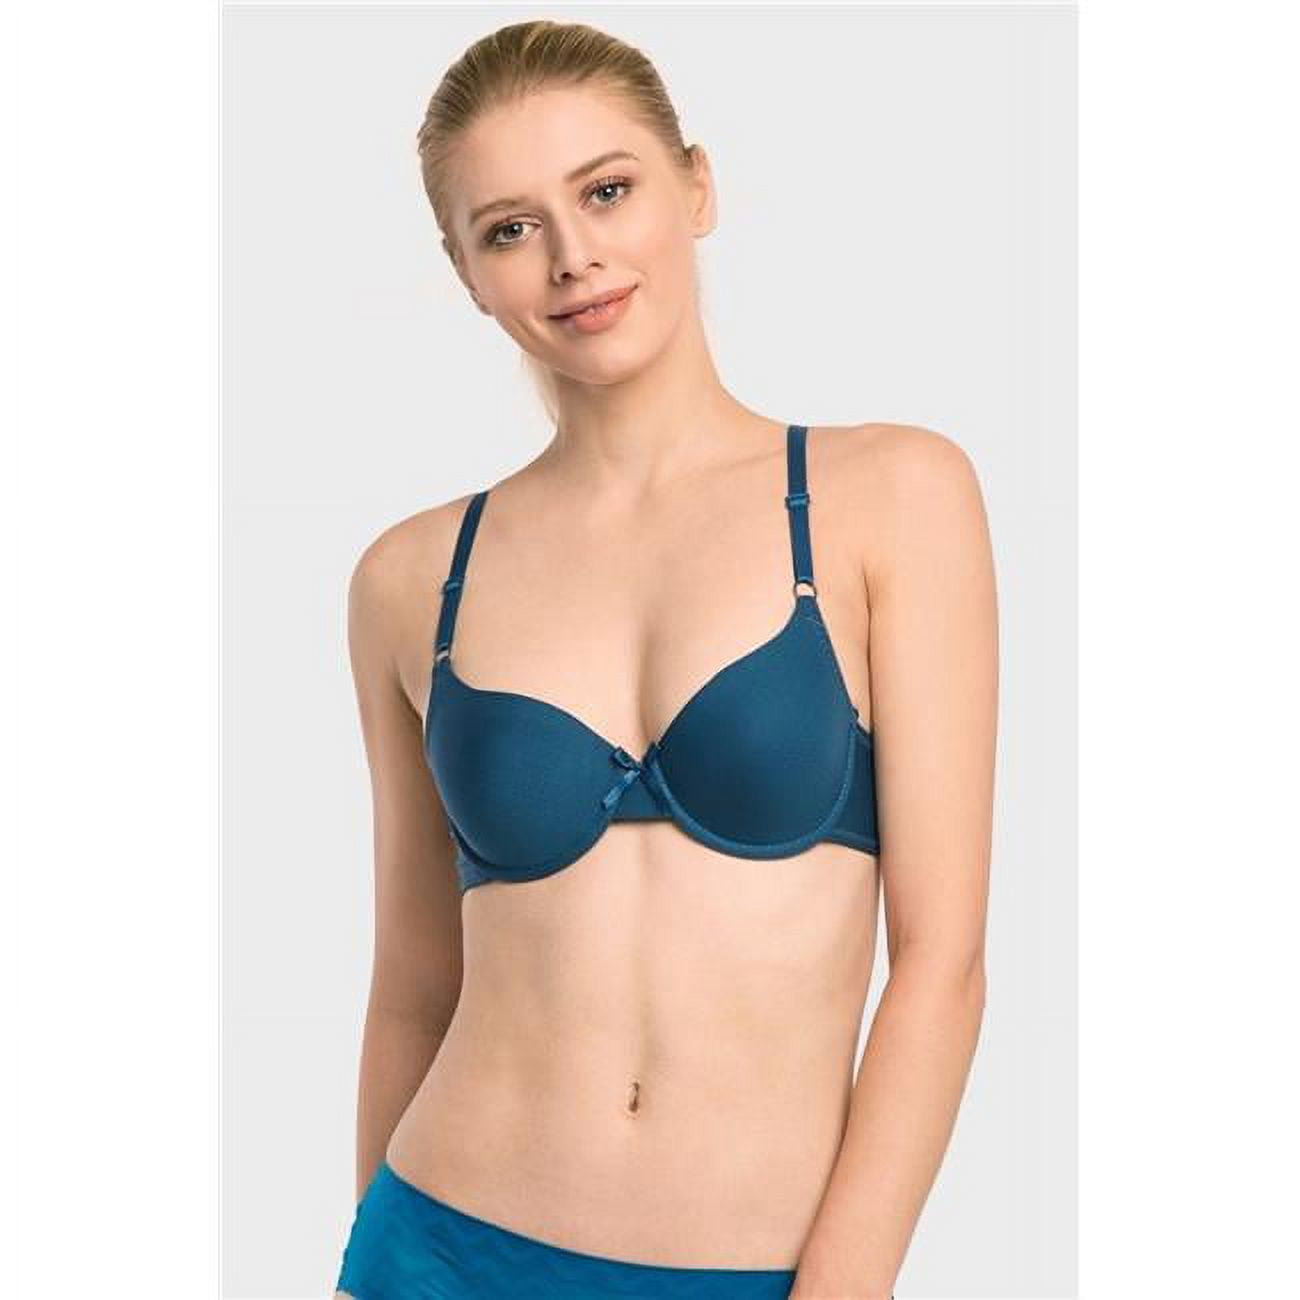 Pepper All You Bra Tan Size 36 B - $32 (41% Off Retail) - From Yesica